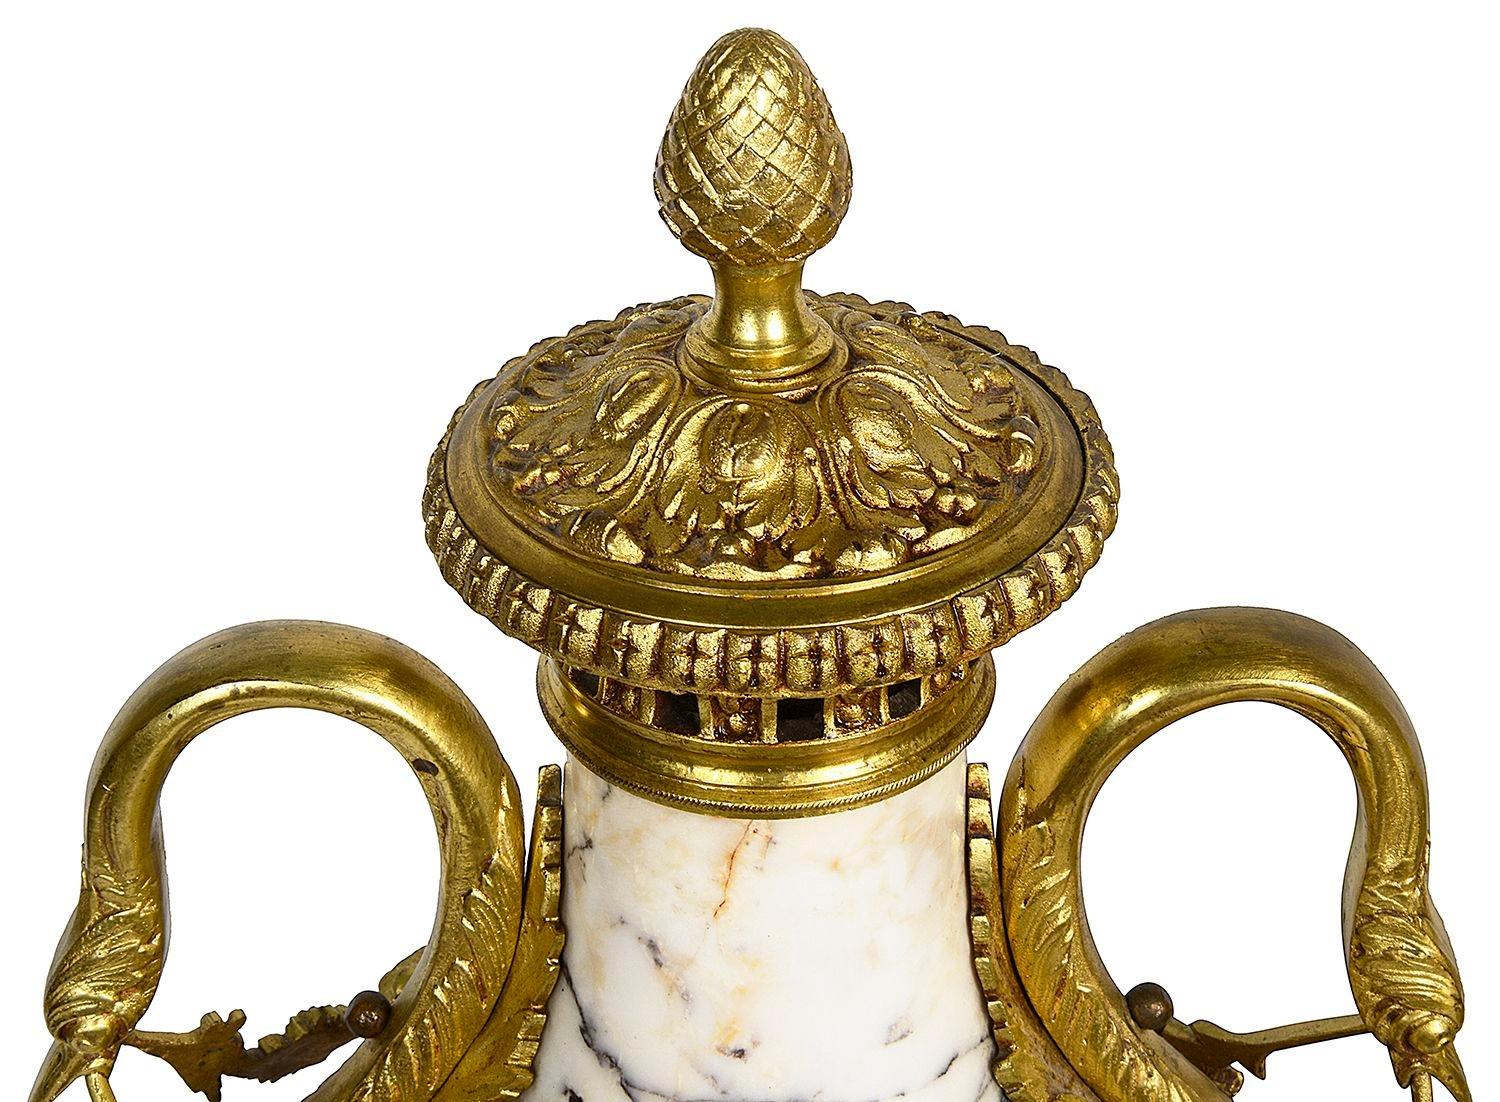 Pair of Classical 19th Century French Louis XVI style marble and gilded ormolu lidded urns. Each with swan head handles and floral swag decoration, raised on plinth bases.

Batch 75 Giooo5/23 CNKZ